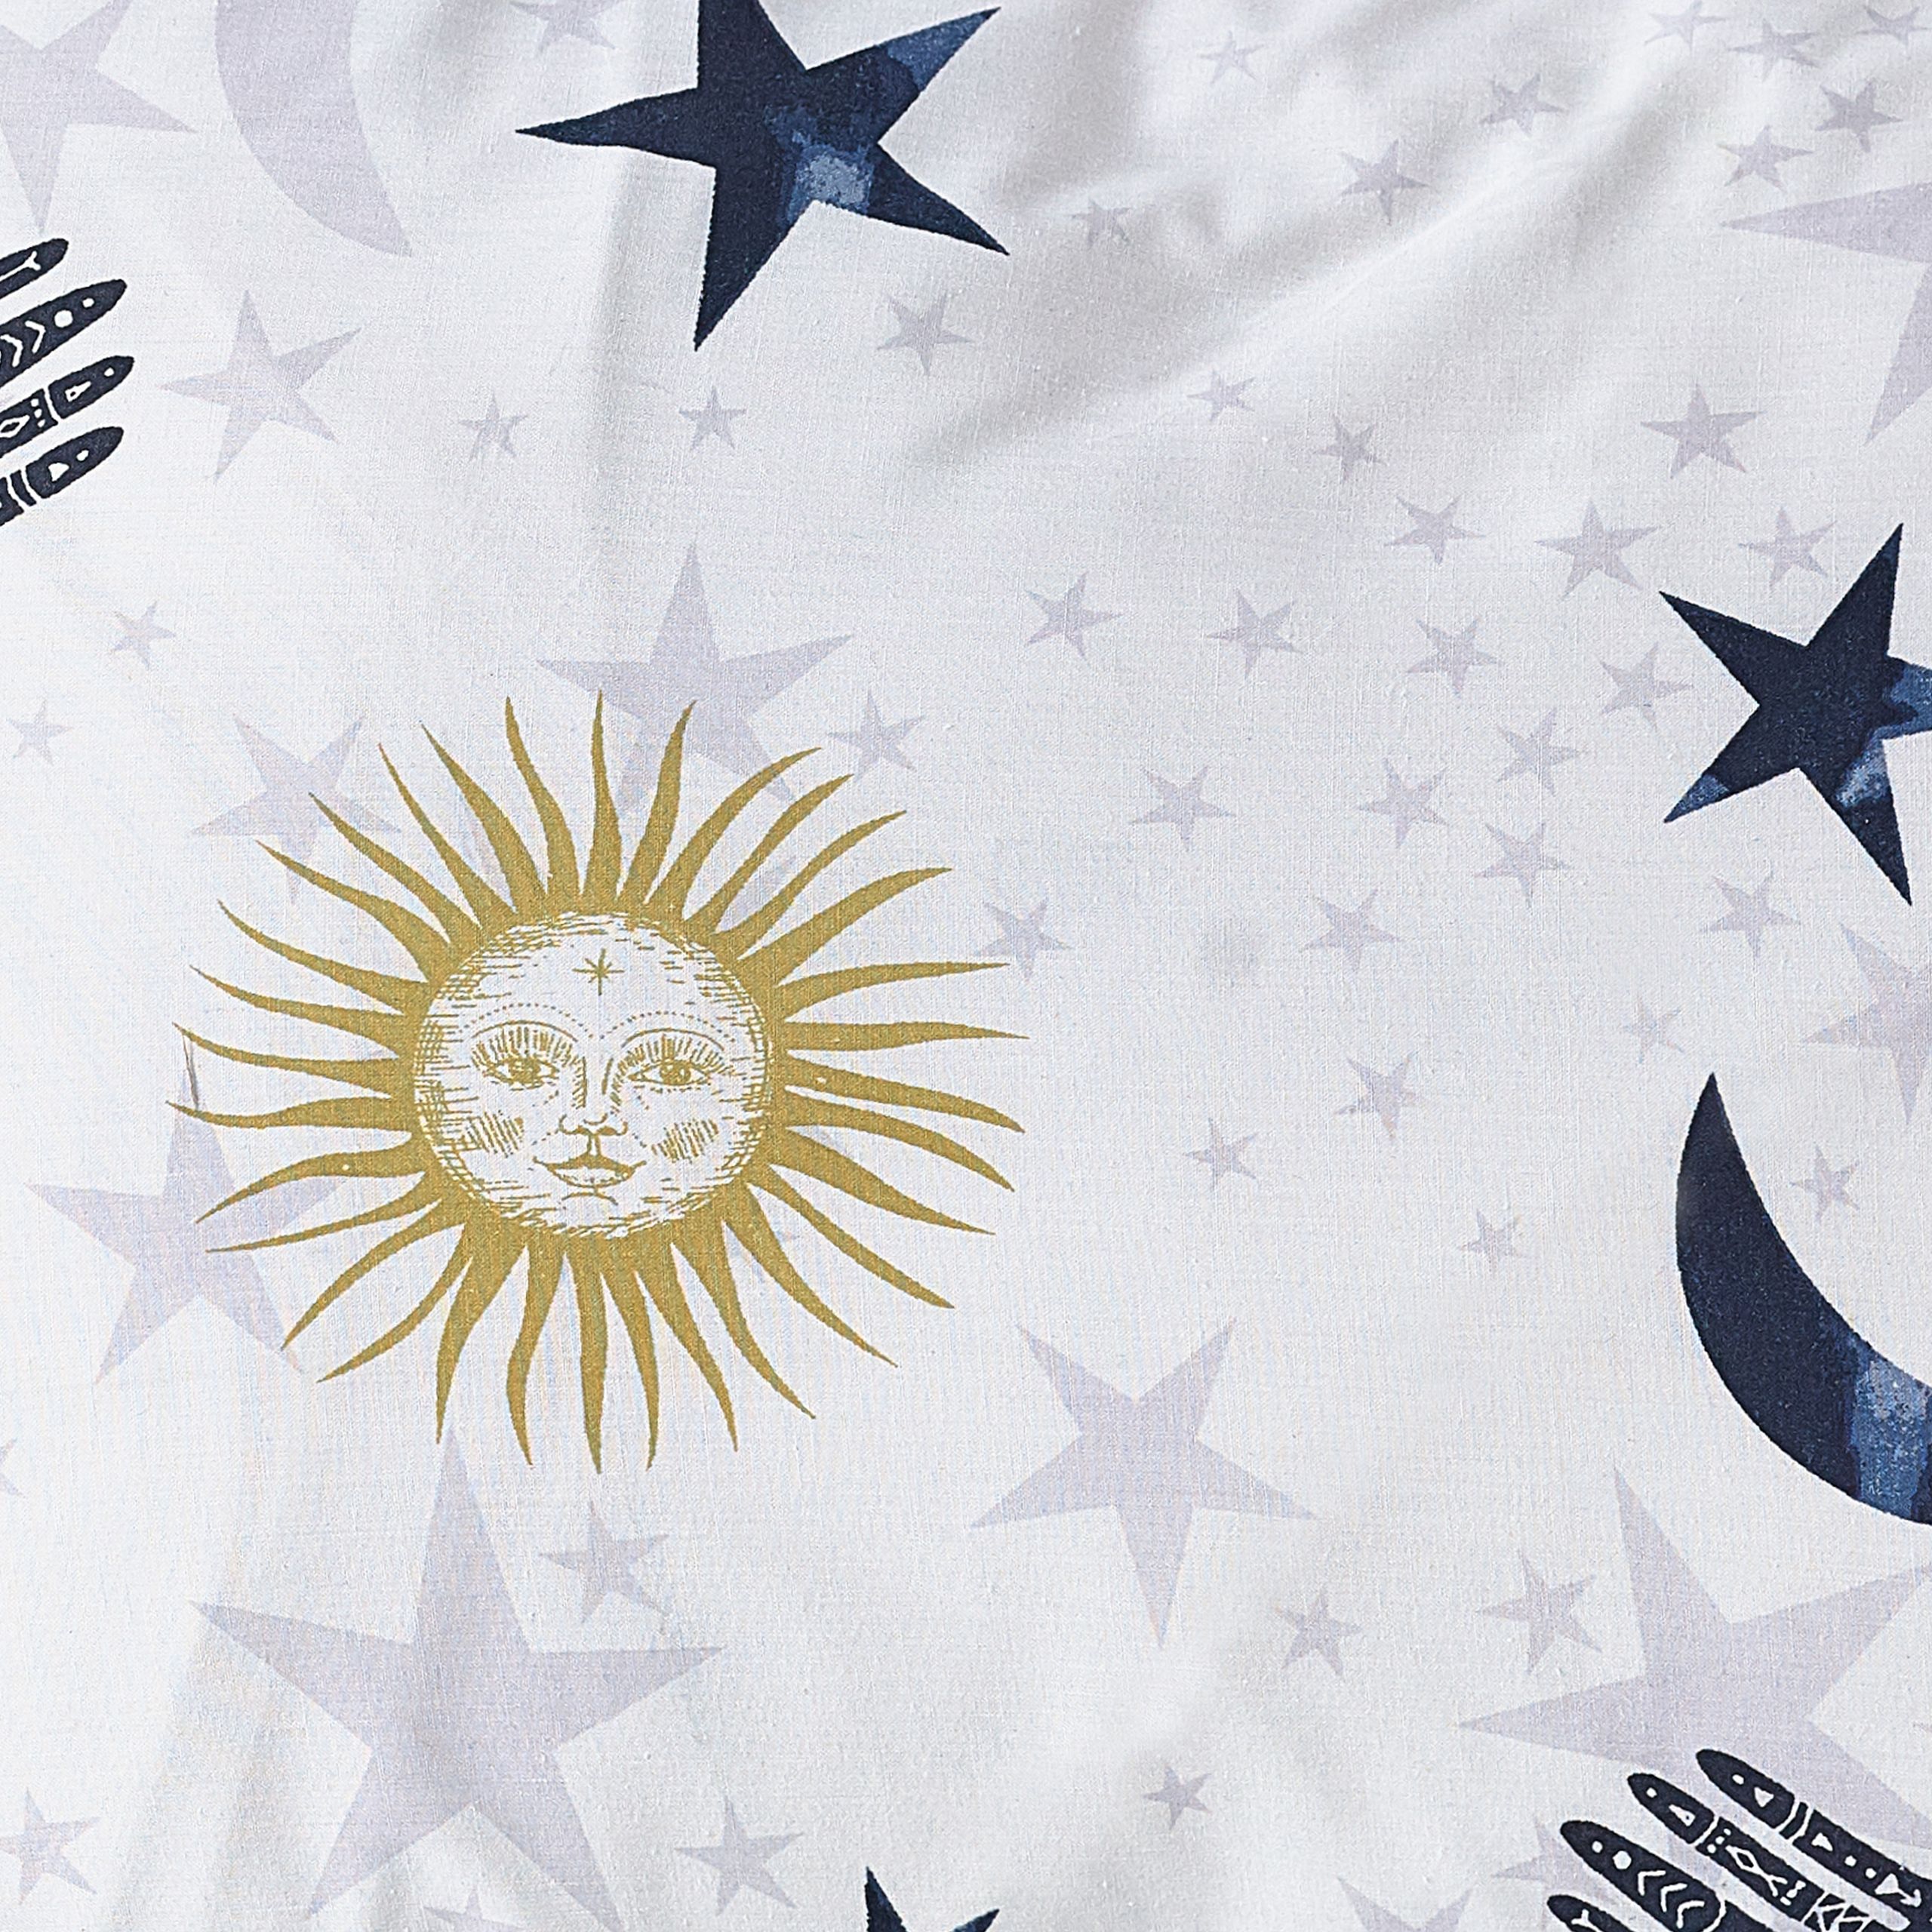 Make your bedroom mystical with this Stargazer duvet set. Featuring a galaxy of suns, moons and stars surrounded by mystical eyes and zodiacs constellations. The magic continues to the reverse with a complimenting design of twinkling stars on a darker base so you can switch the look when you need to.